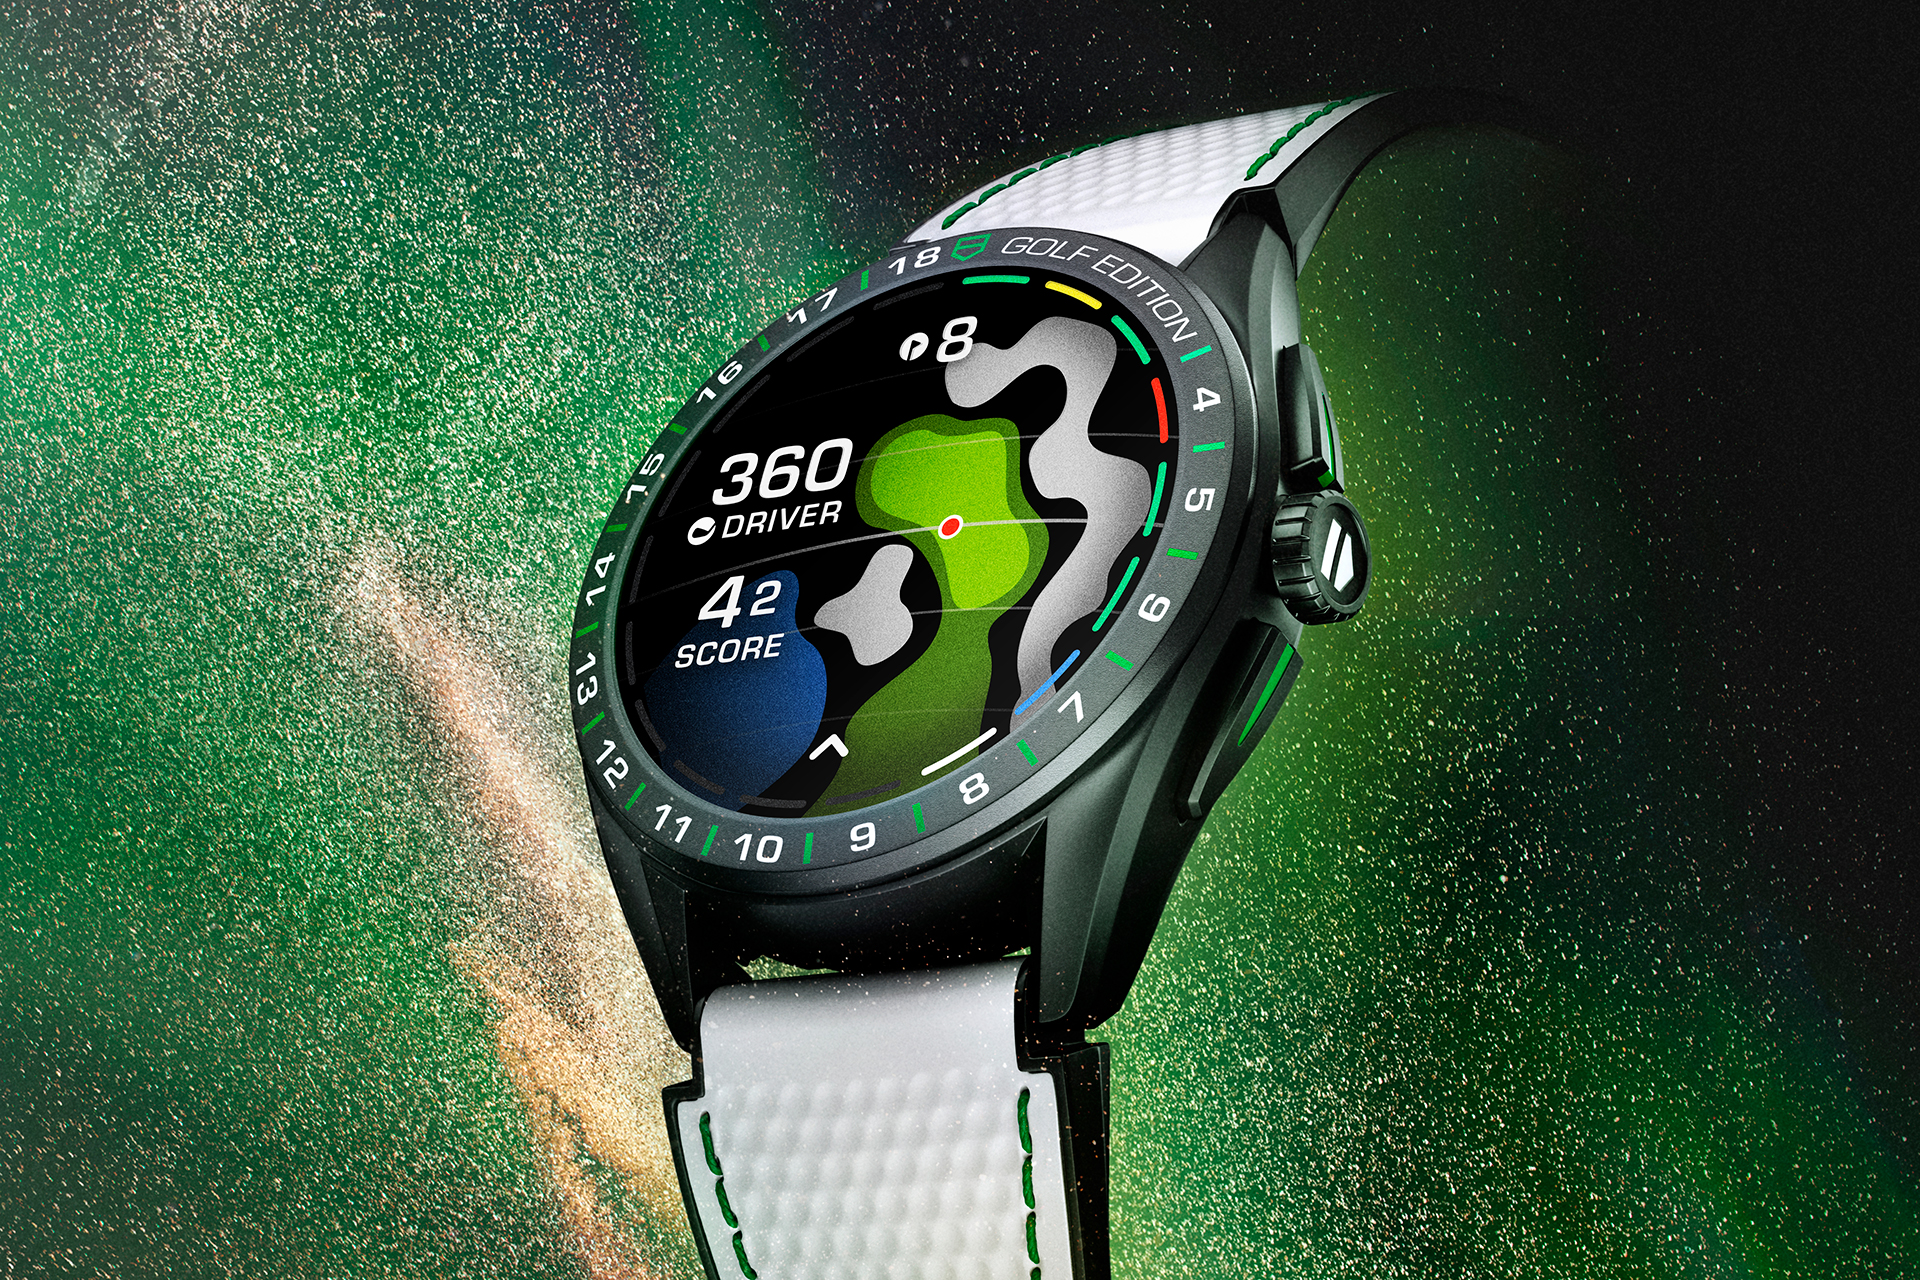 TAG Heuer's latest golf smartwatch offers more help with your shots